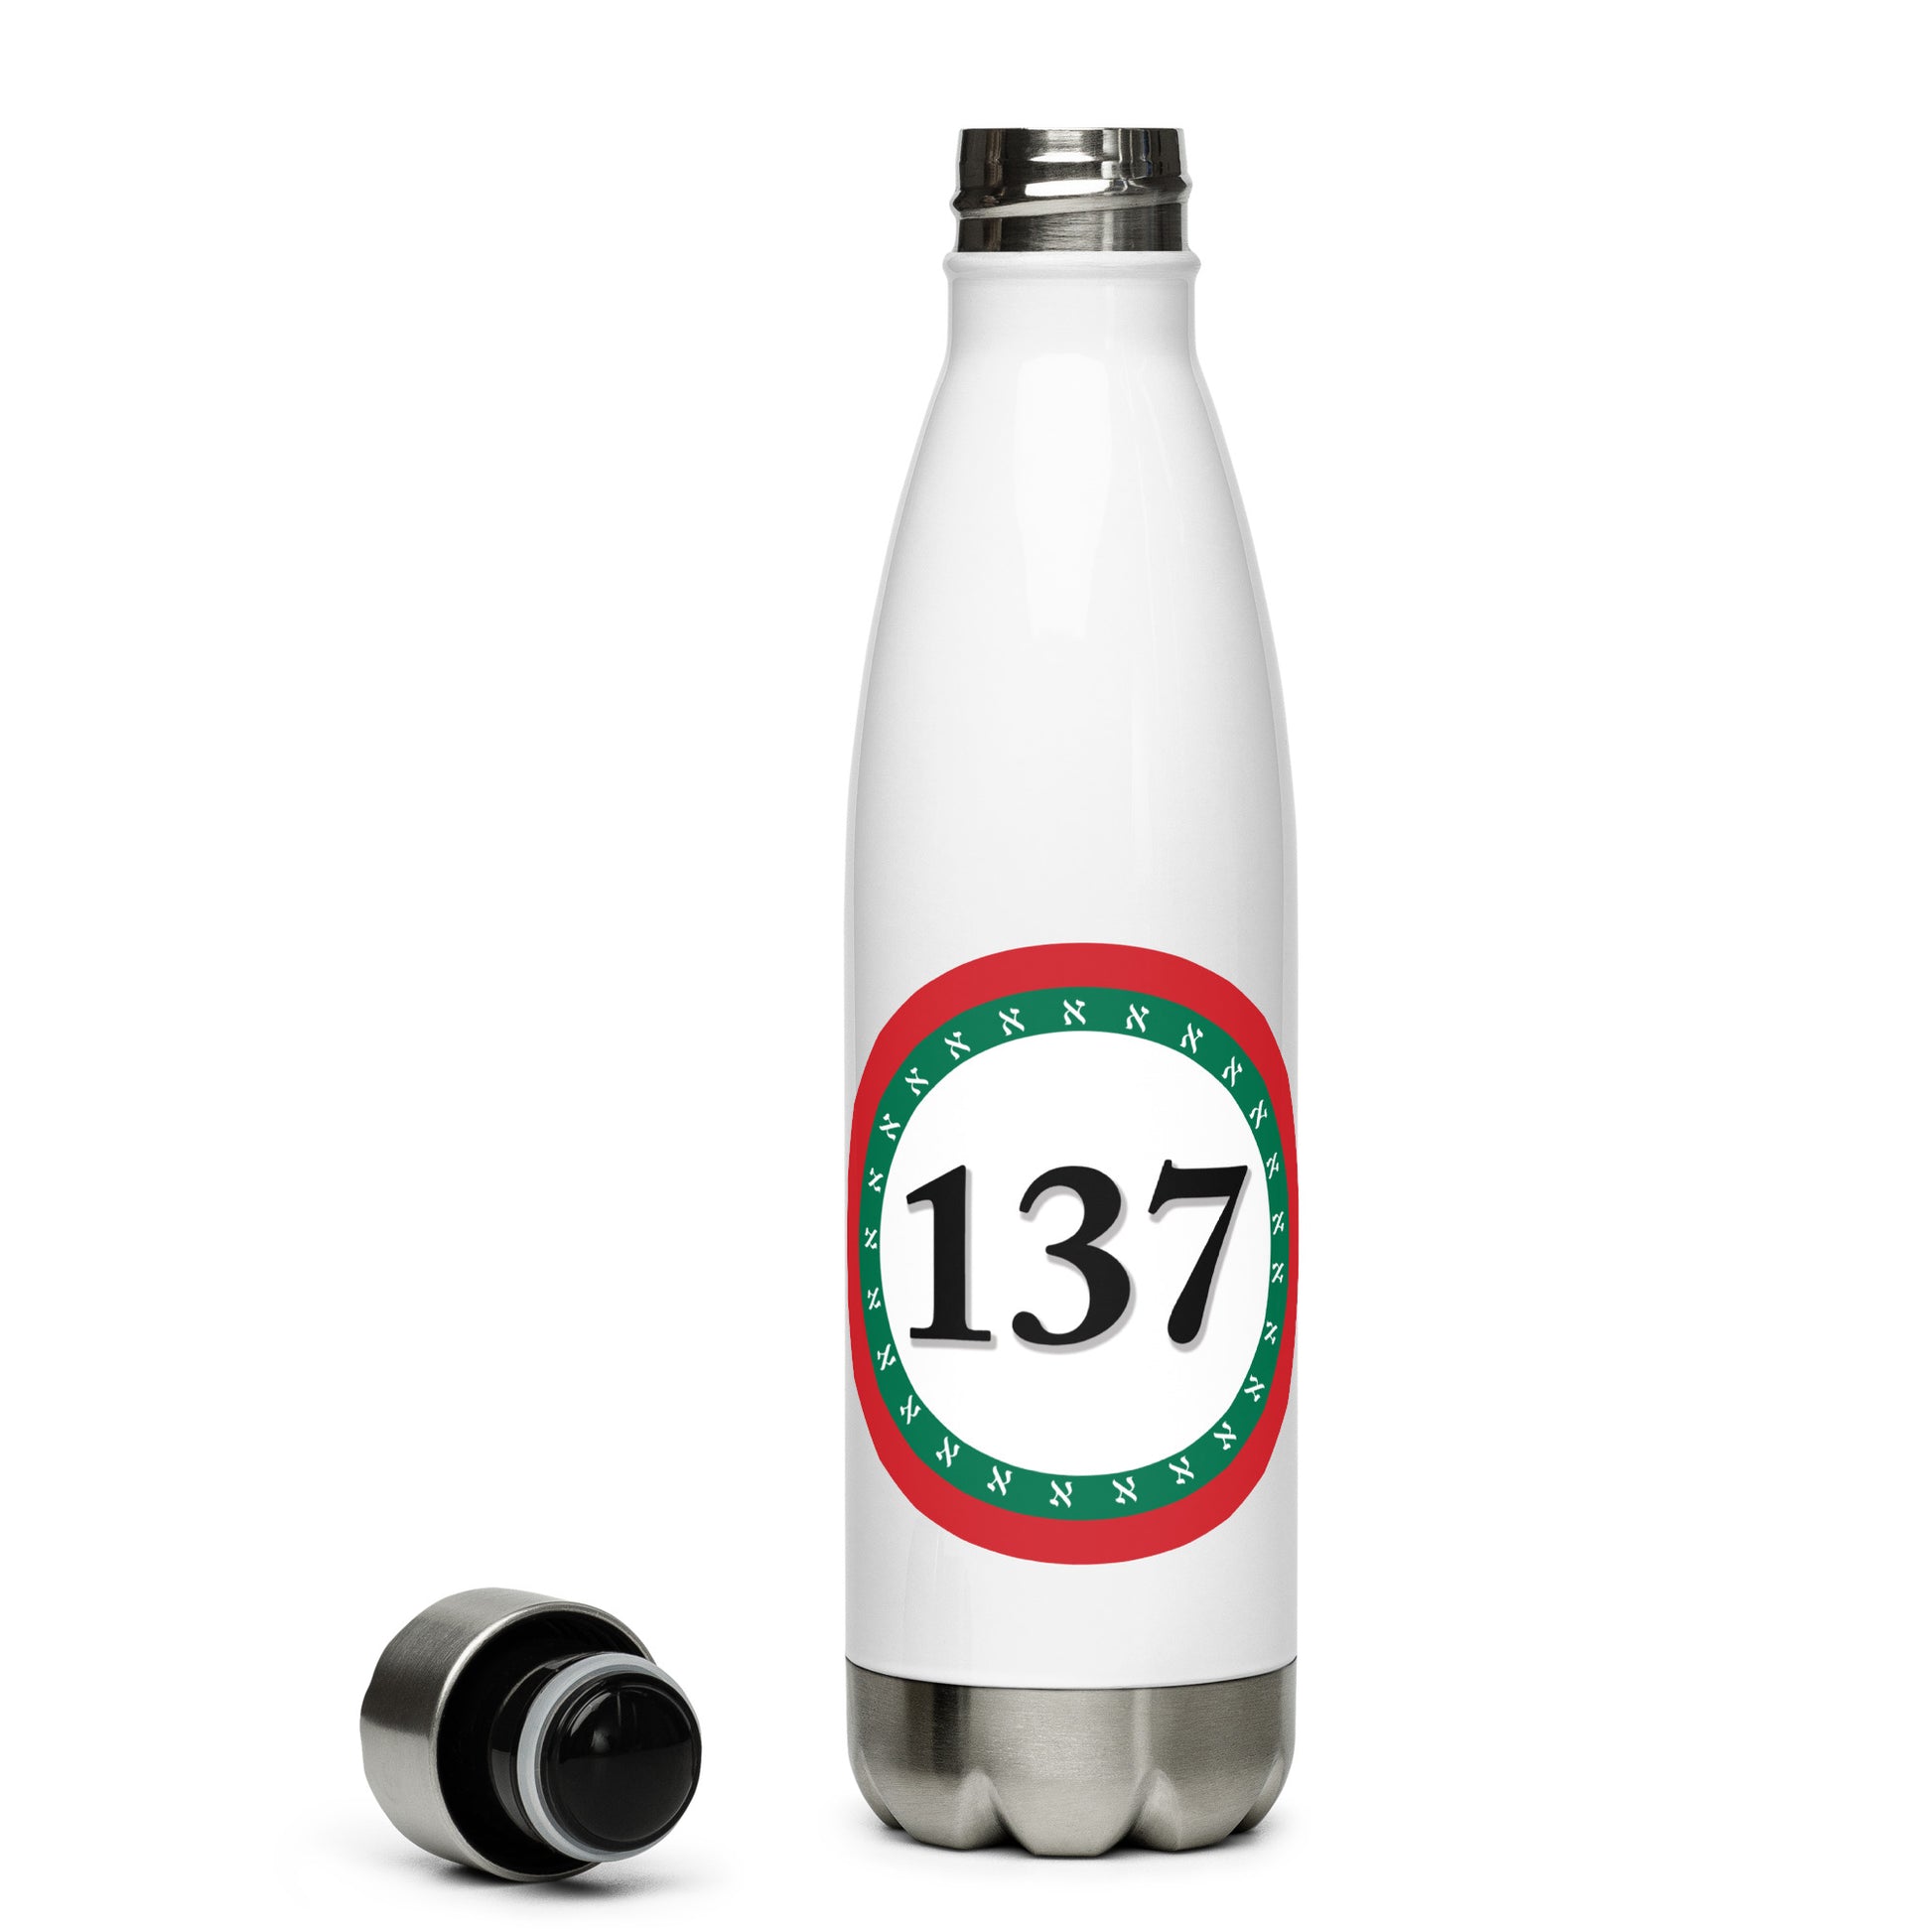  Stainless-Steel-Water-Bottle-17oz-Wht-137 Consciousness-3-137online.com